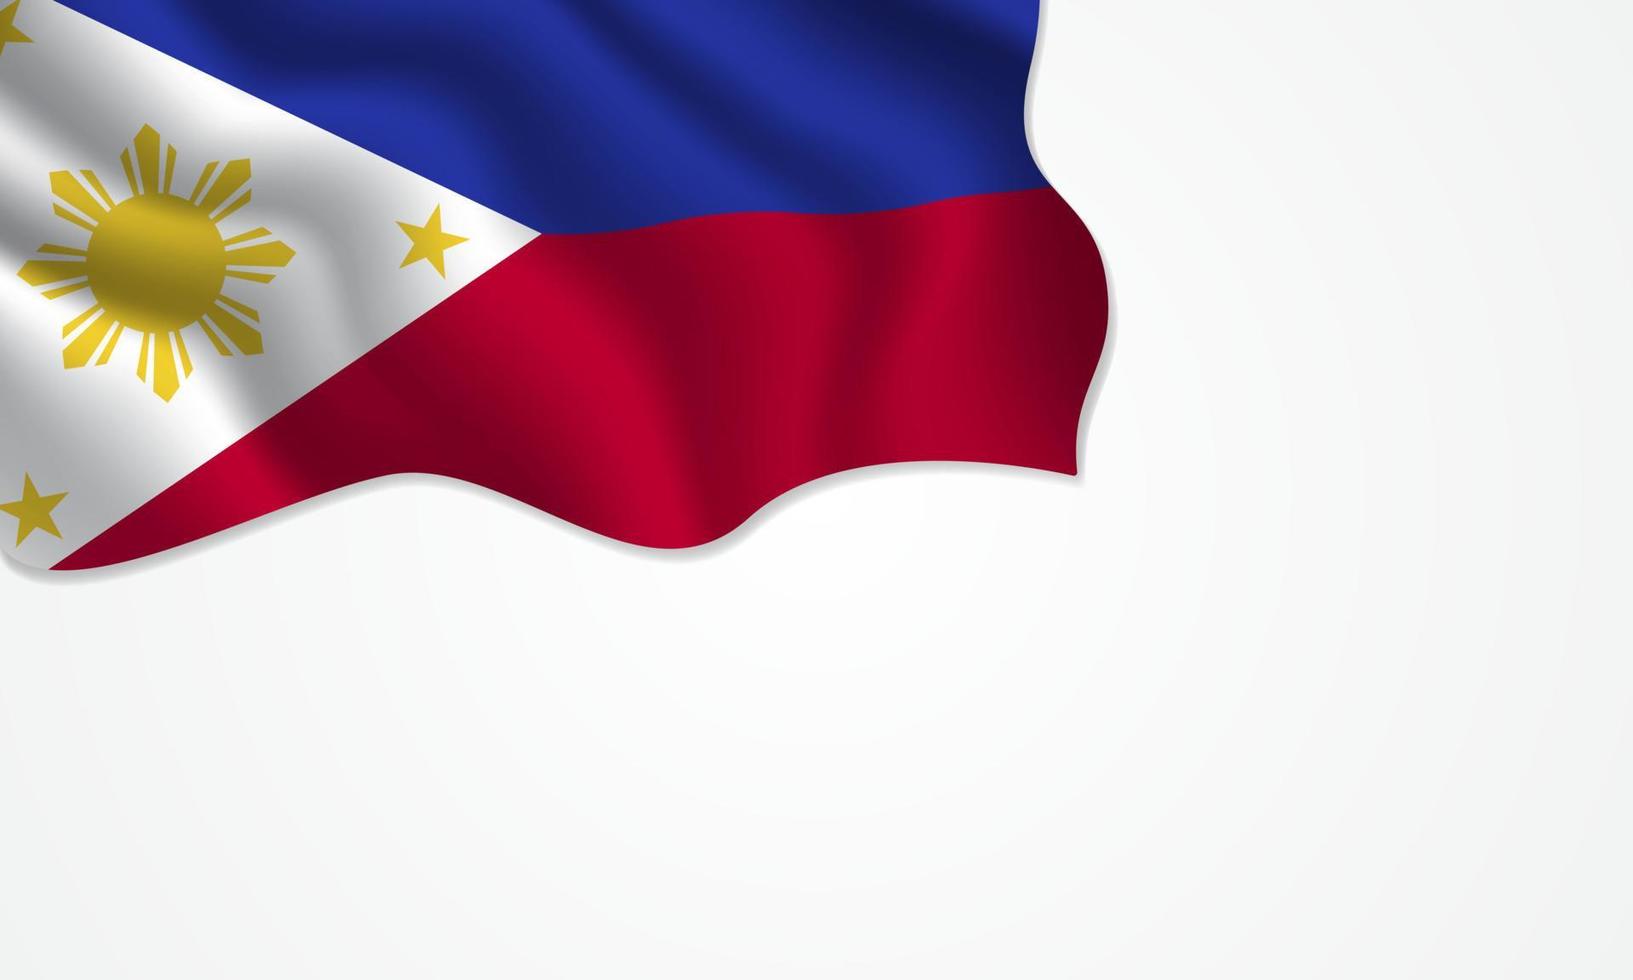 Philippines flag waving illustration with copy space on isolated background vector